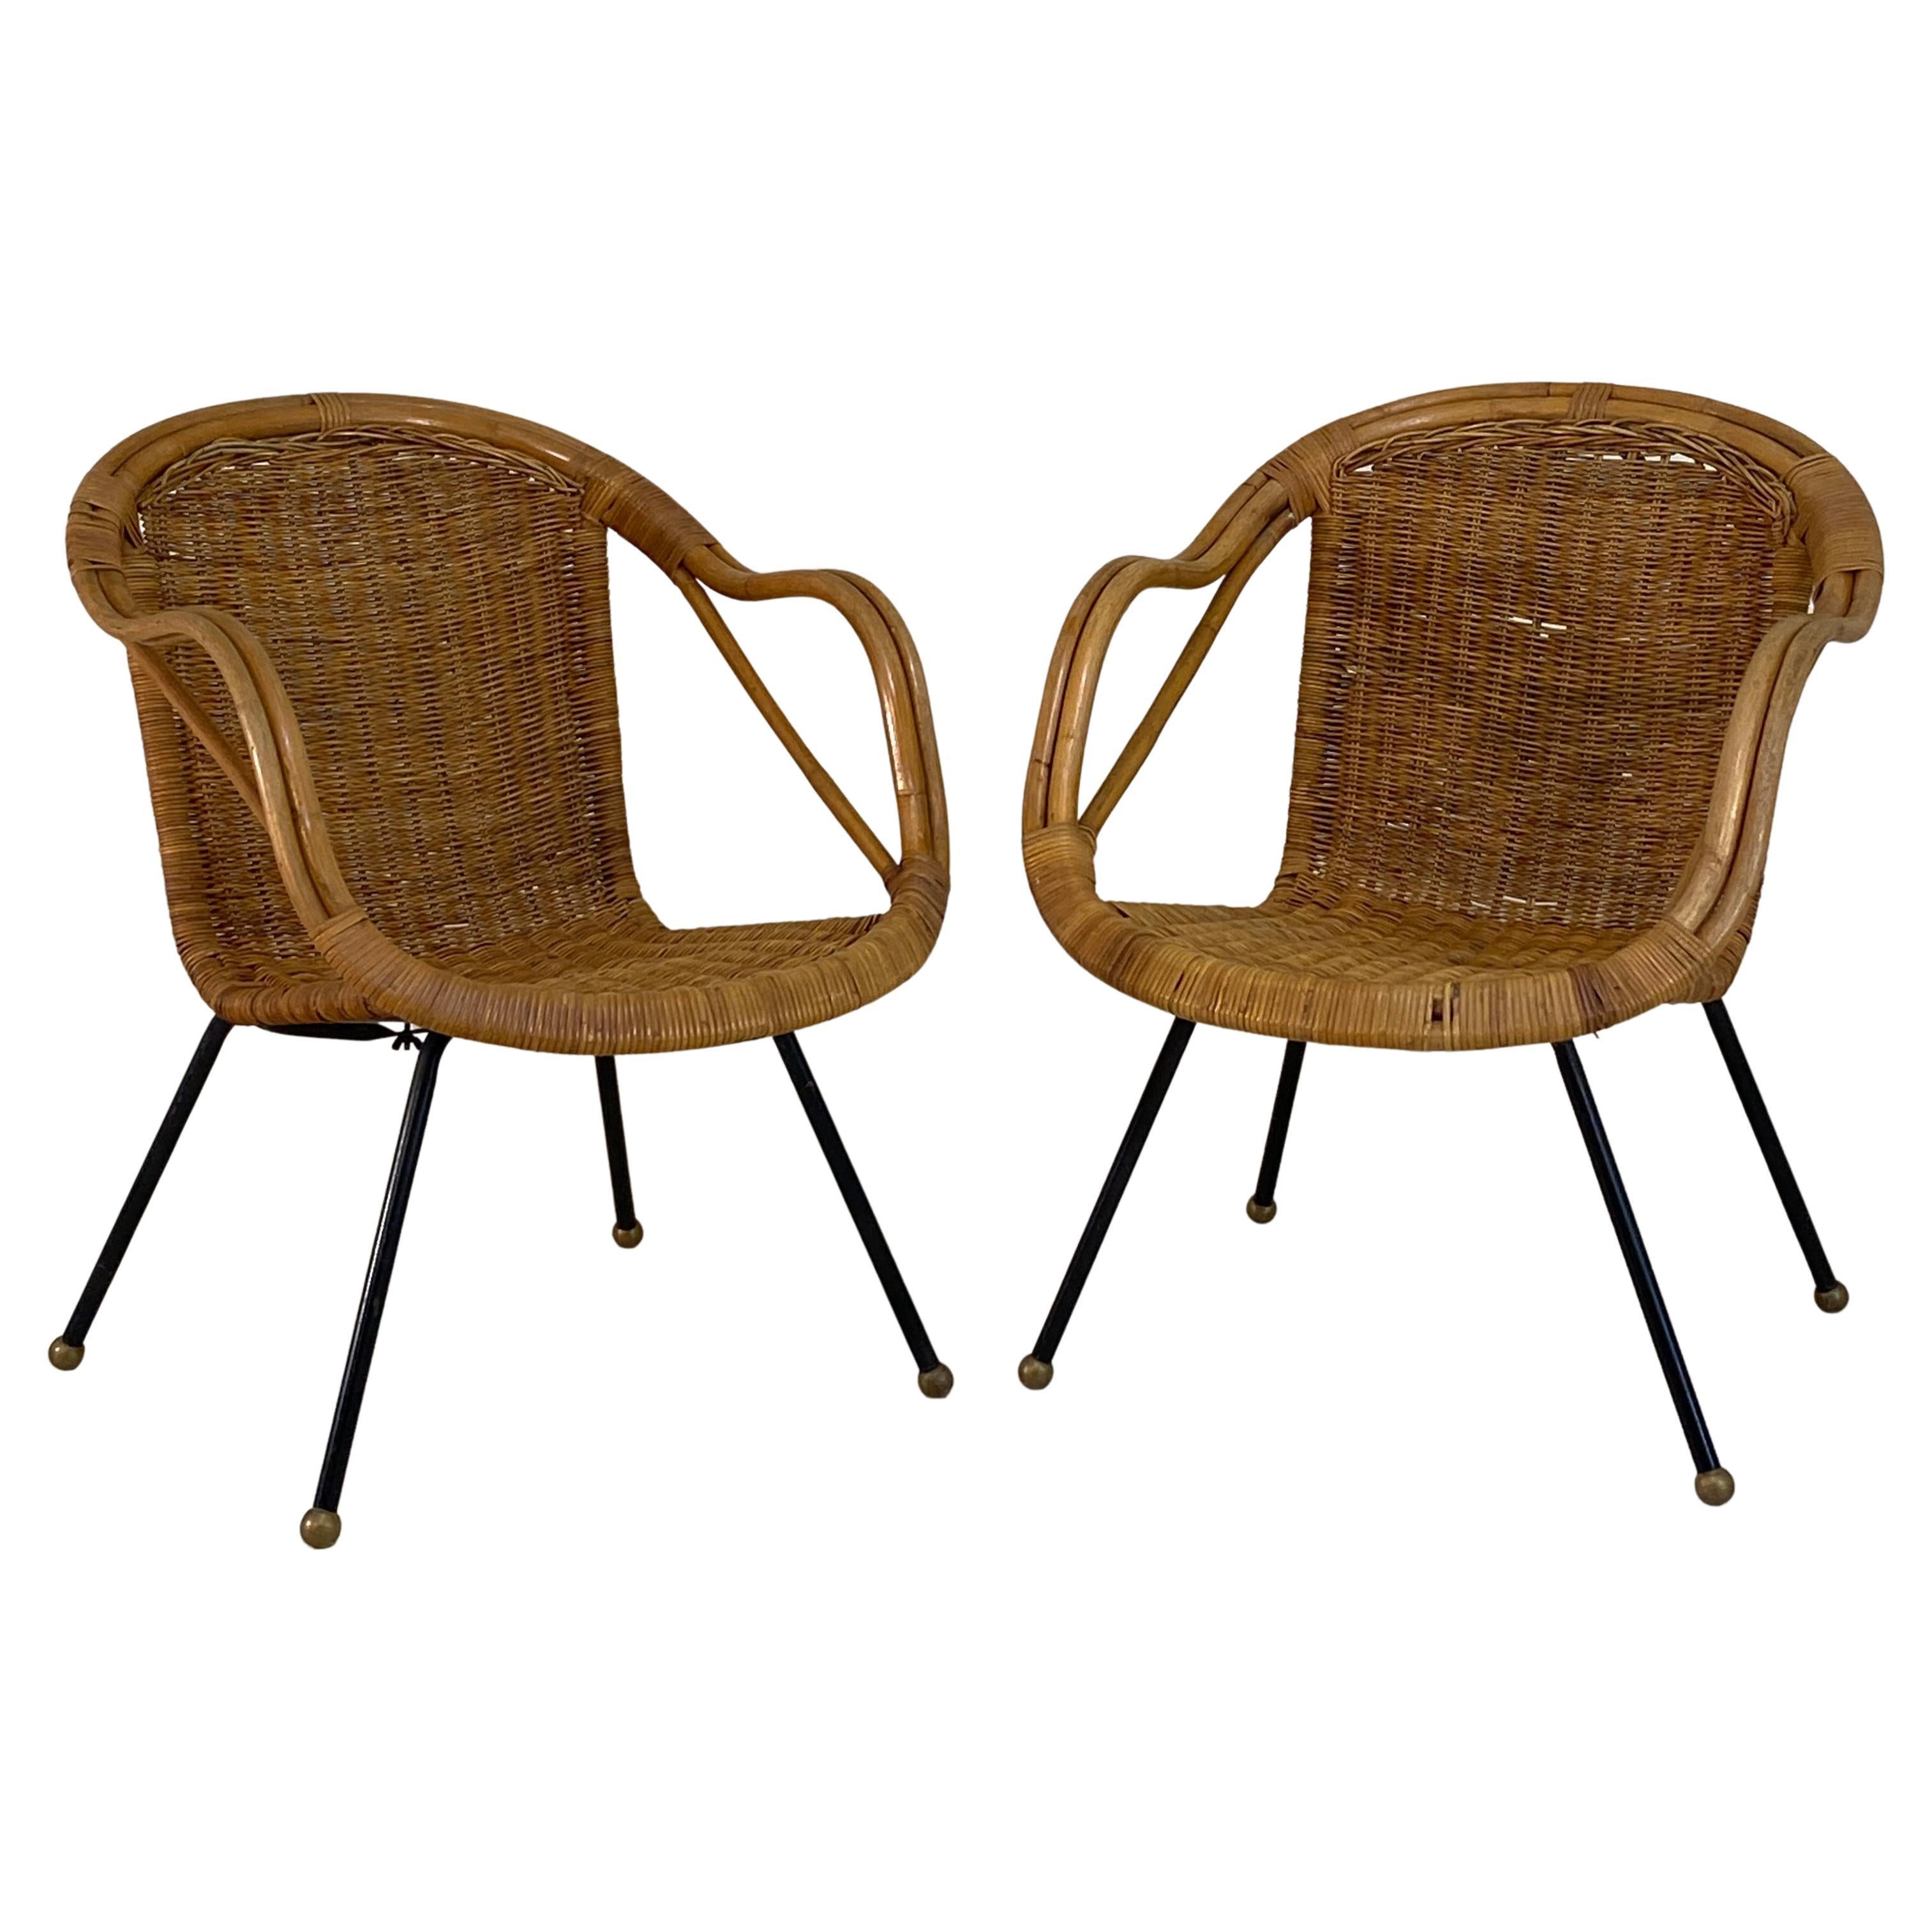 Patio Lounge Armchairs by Tropic Cane of Hong Kong